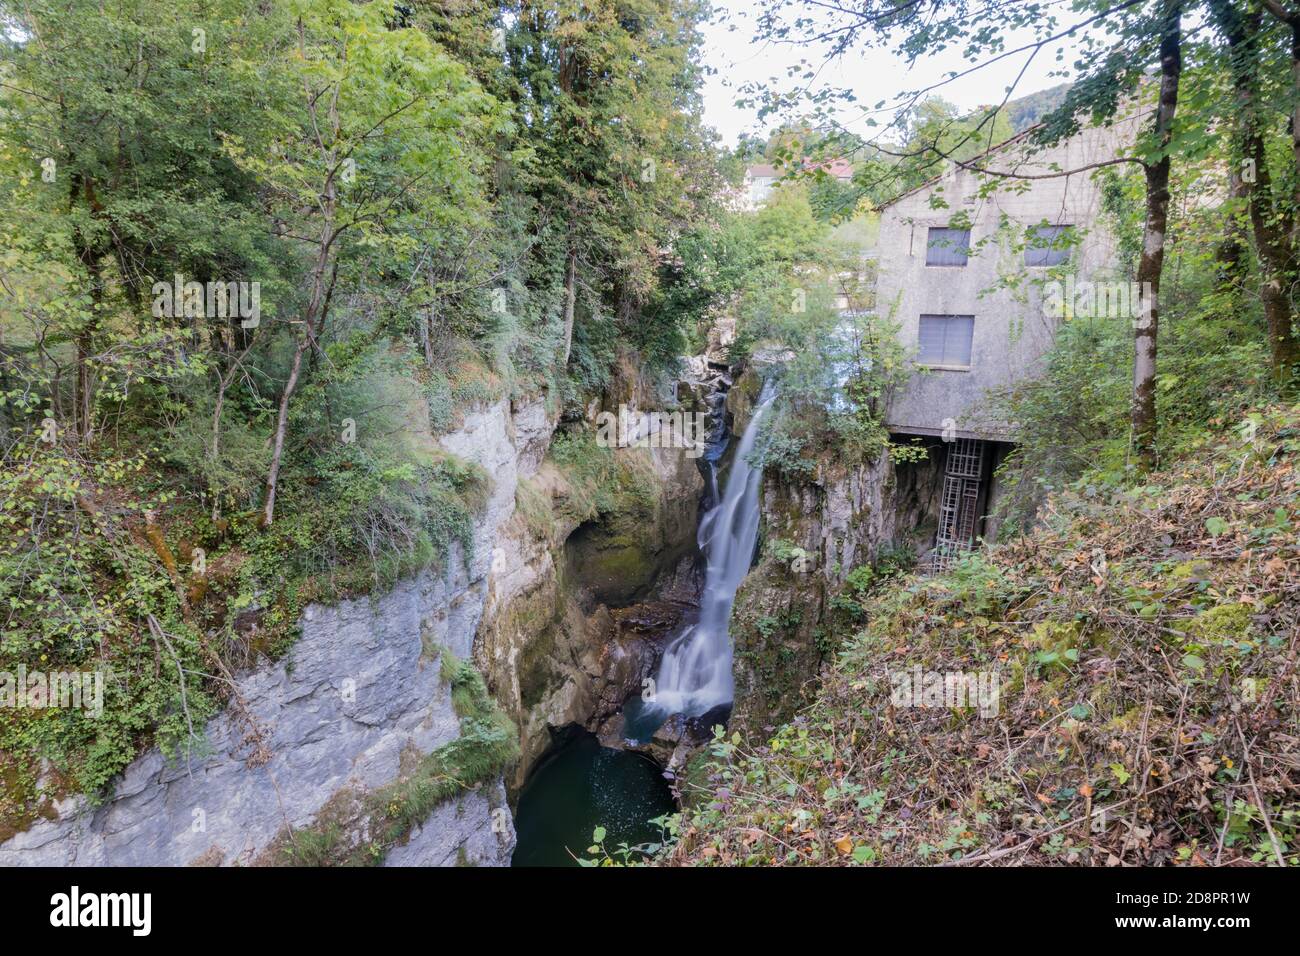 Gorges & waterfalls of Langouette in Planches en Montagnes, Jura in France Stock Photo